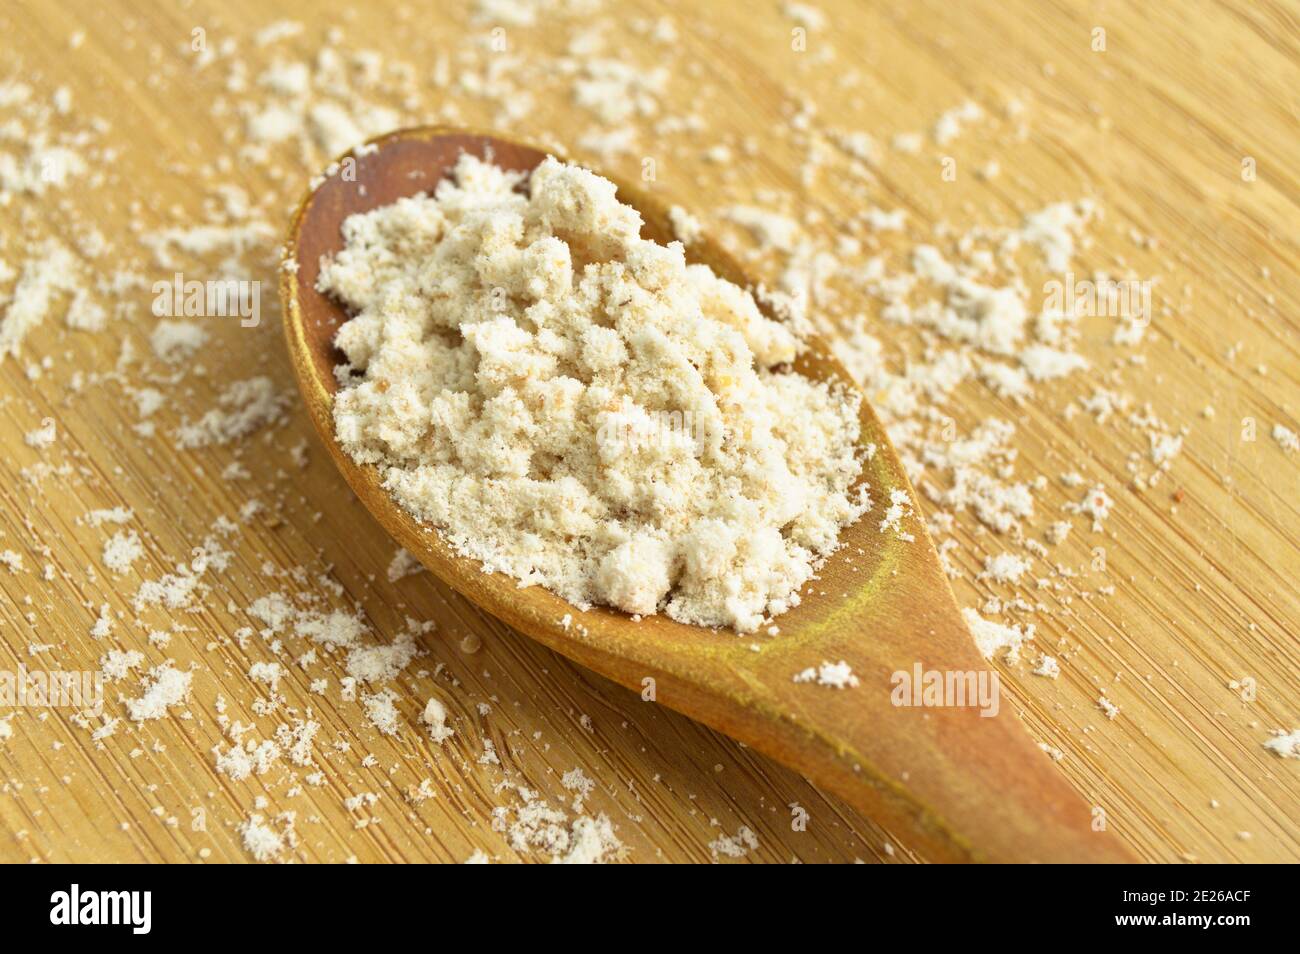 Spice type used to give flavor in powder mahleb or mahaleb pastries, in wooden spoon, on bamboo cutting board Stock Photo